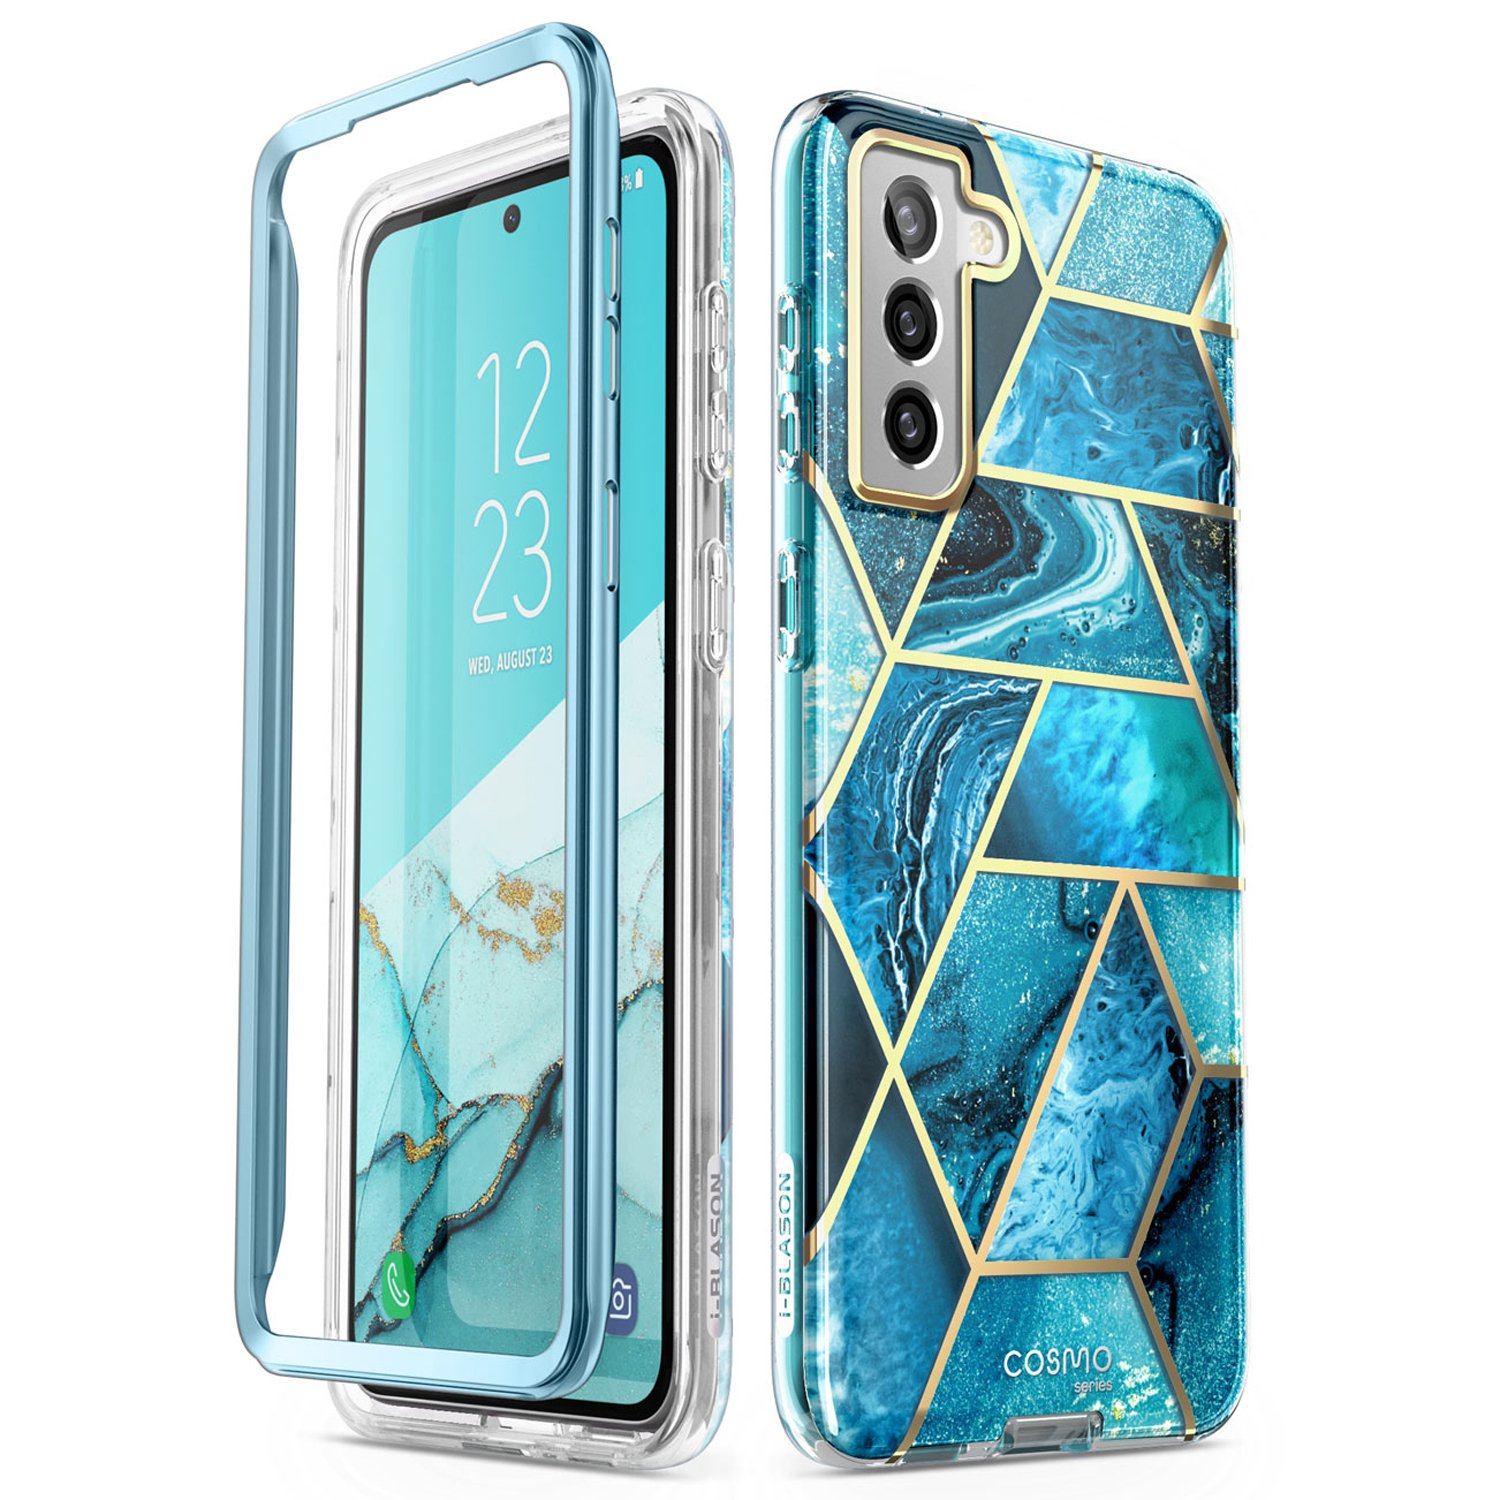 i-Blason Cosmo Series Case for Samsung Galaxy S21(Without Screen Protector), Ocean S21 i-Blason 